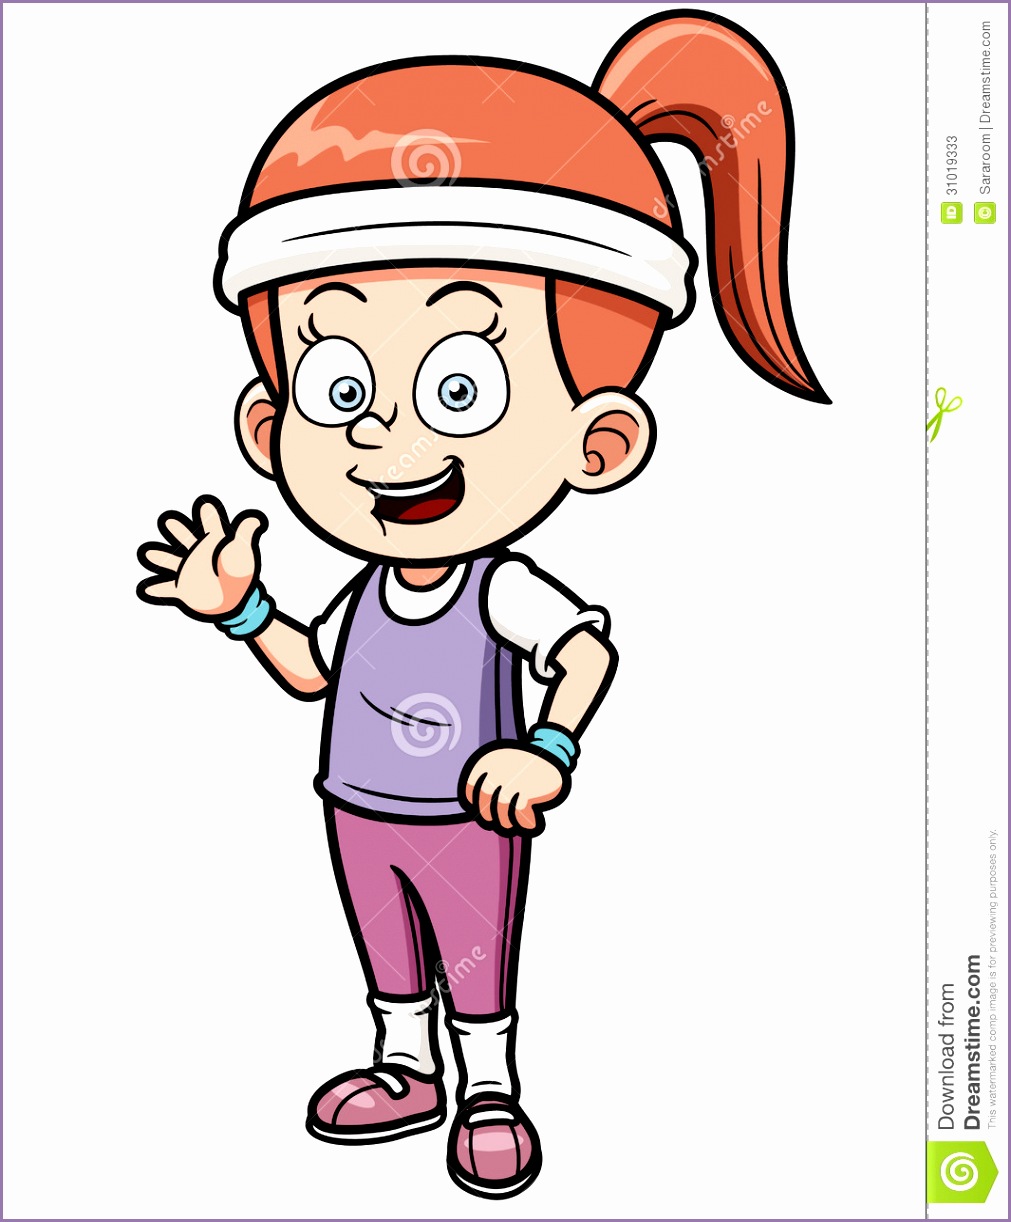 Royalty Free Stock Download Fitness Girl Cartoon